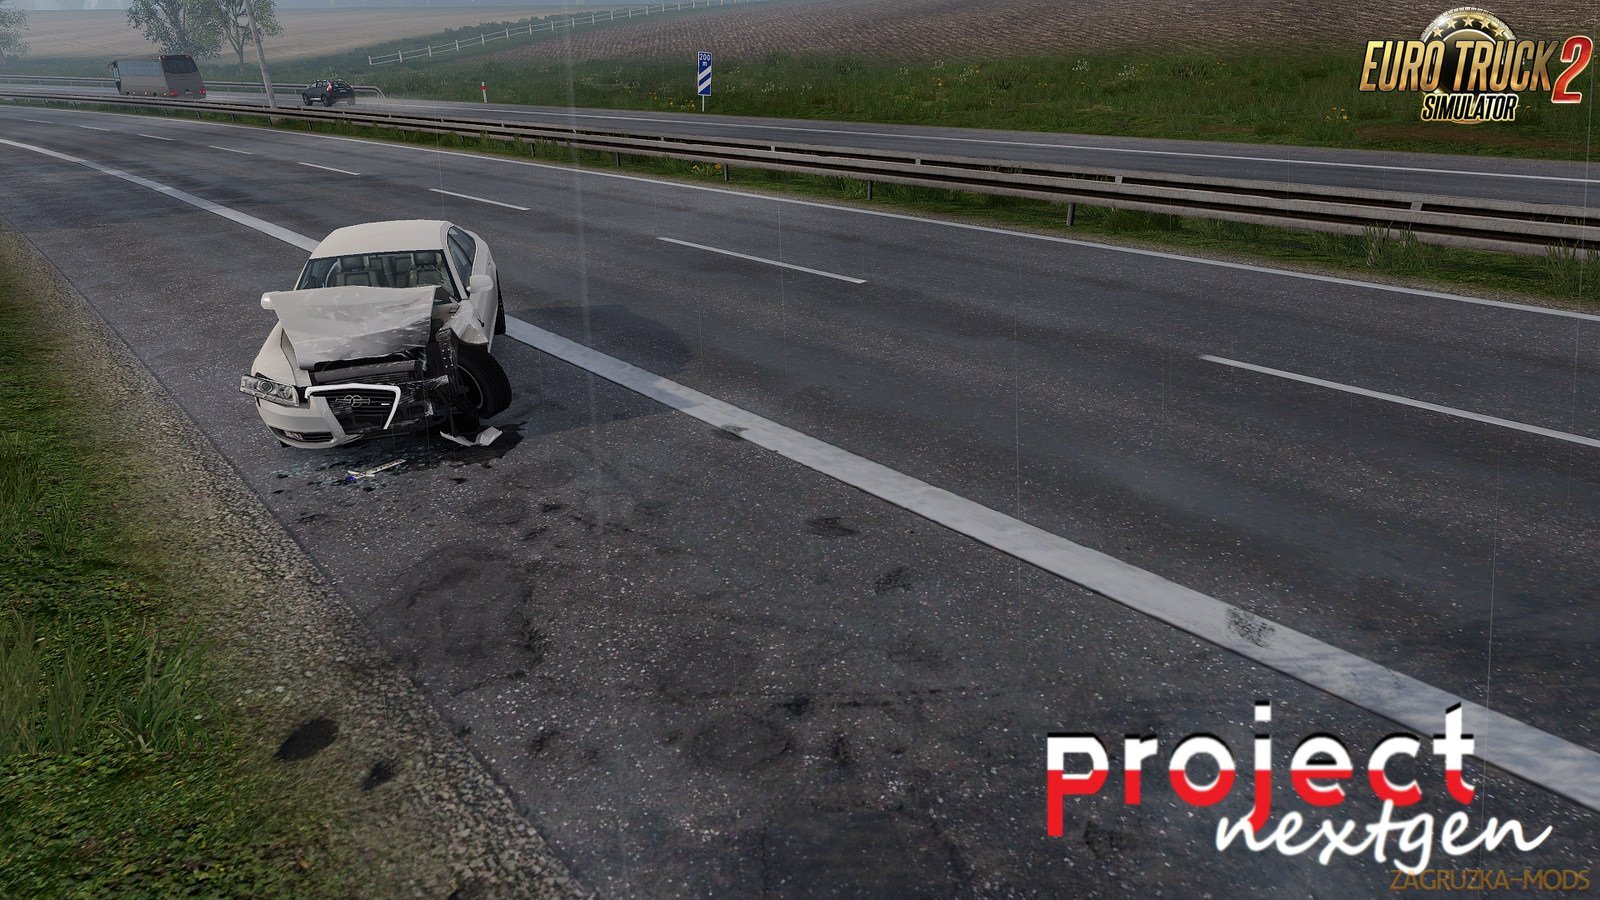 Project Next-Gen Graphic Mod v1.3 (Beta Version) byDamianSVW (1.32.x) for ETS 2